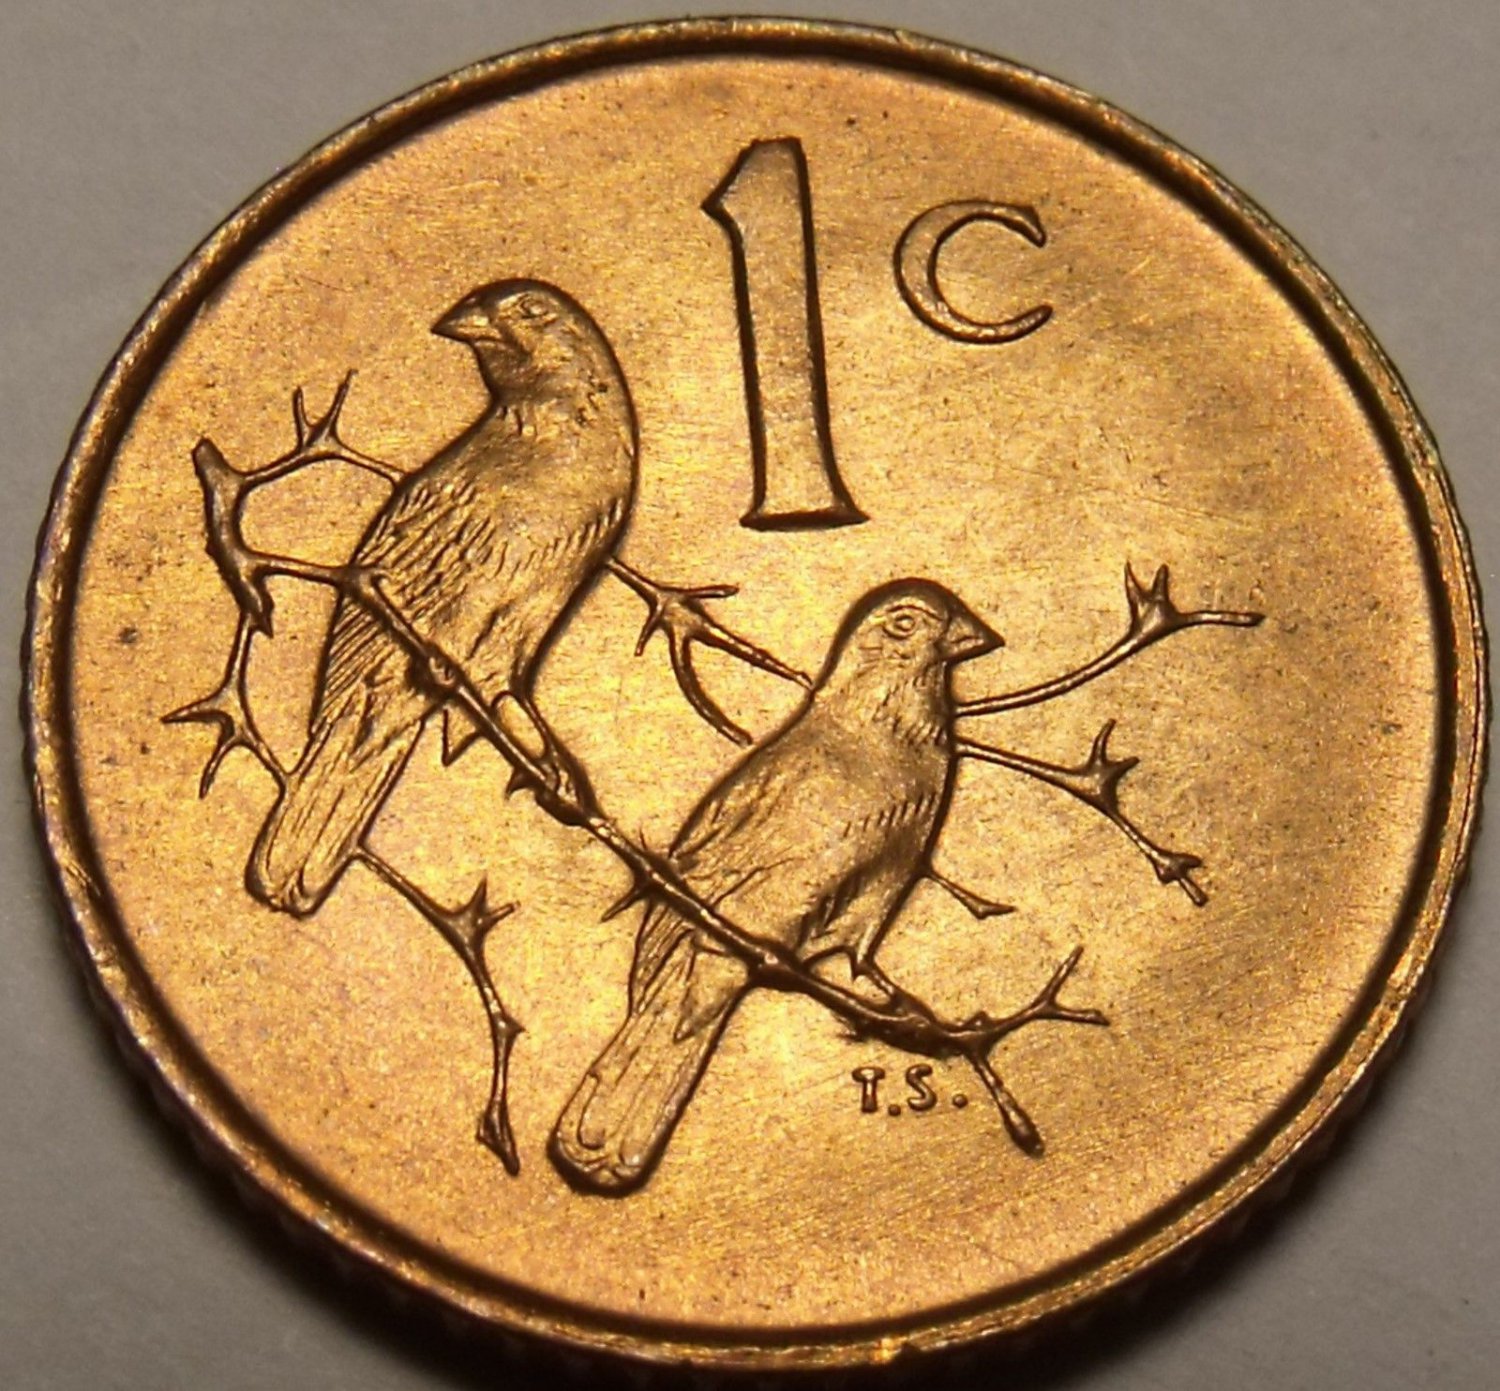 South Africa 1966 Cent Gem Unc SPARROWS SUID AFRICA Free Shipping.